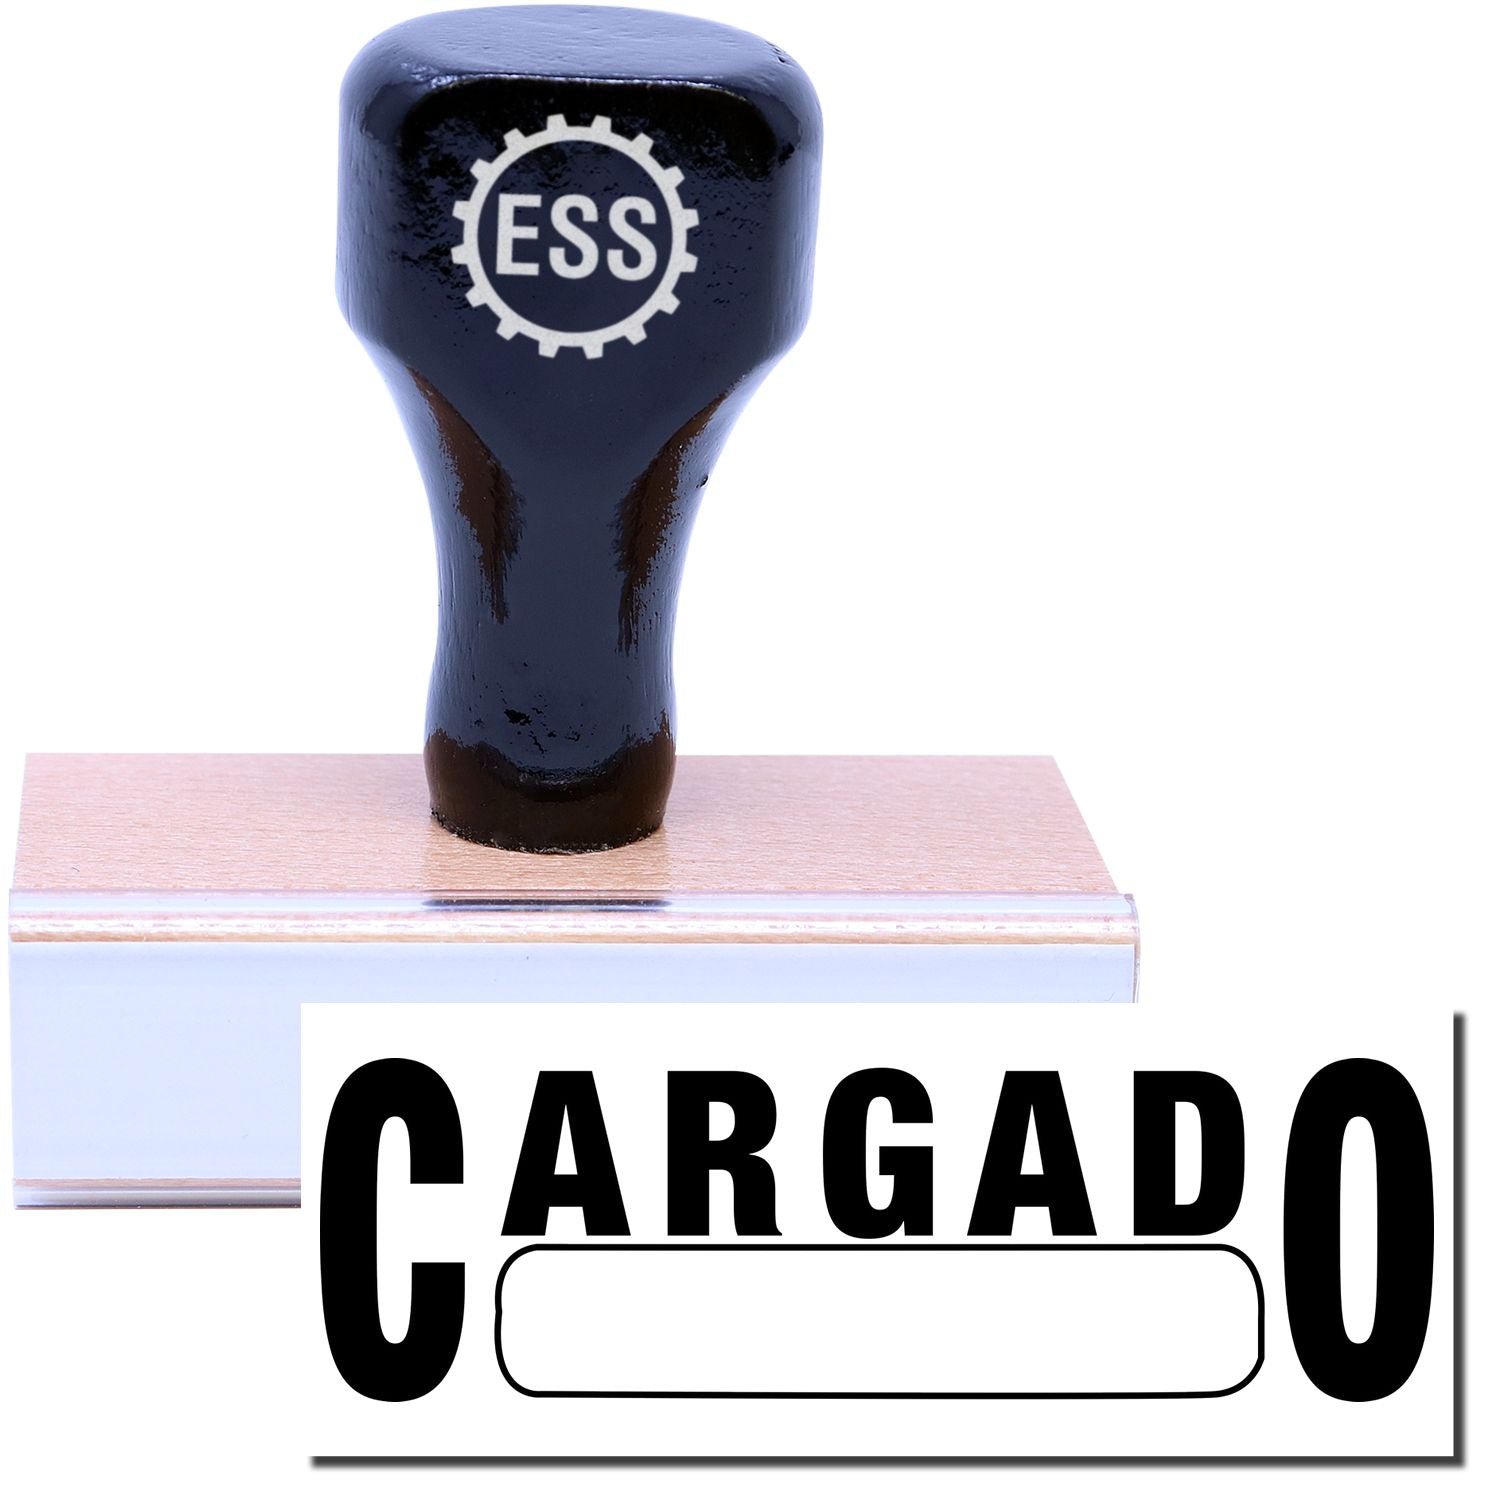 A stock office rubber stamp with a stamped image showing how the text "CARGADO" with a box is displayed after stamping.